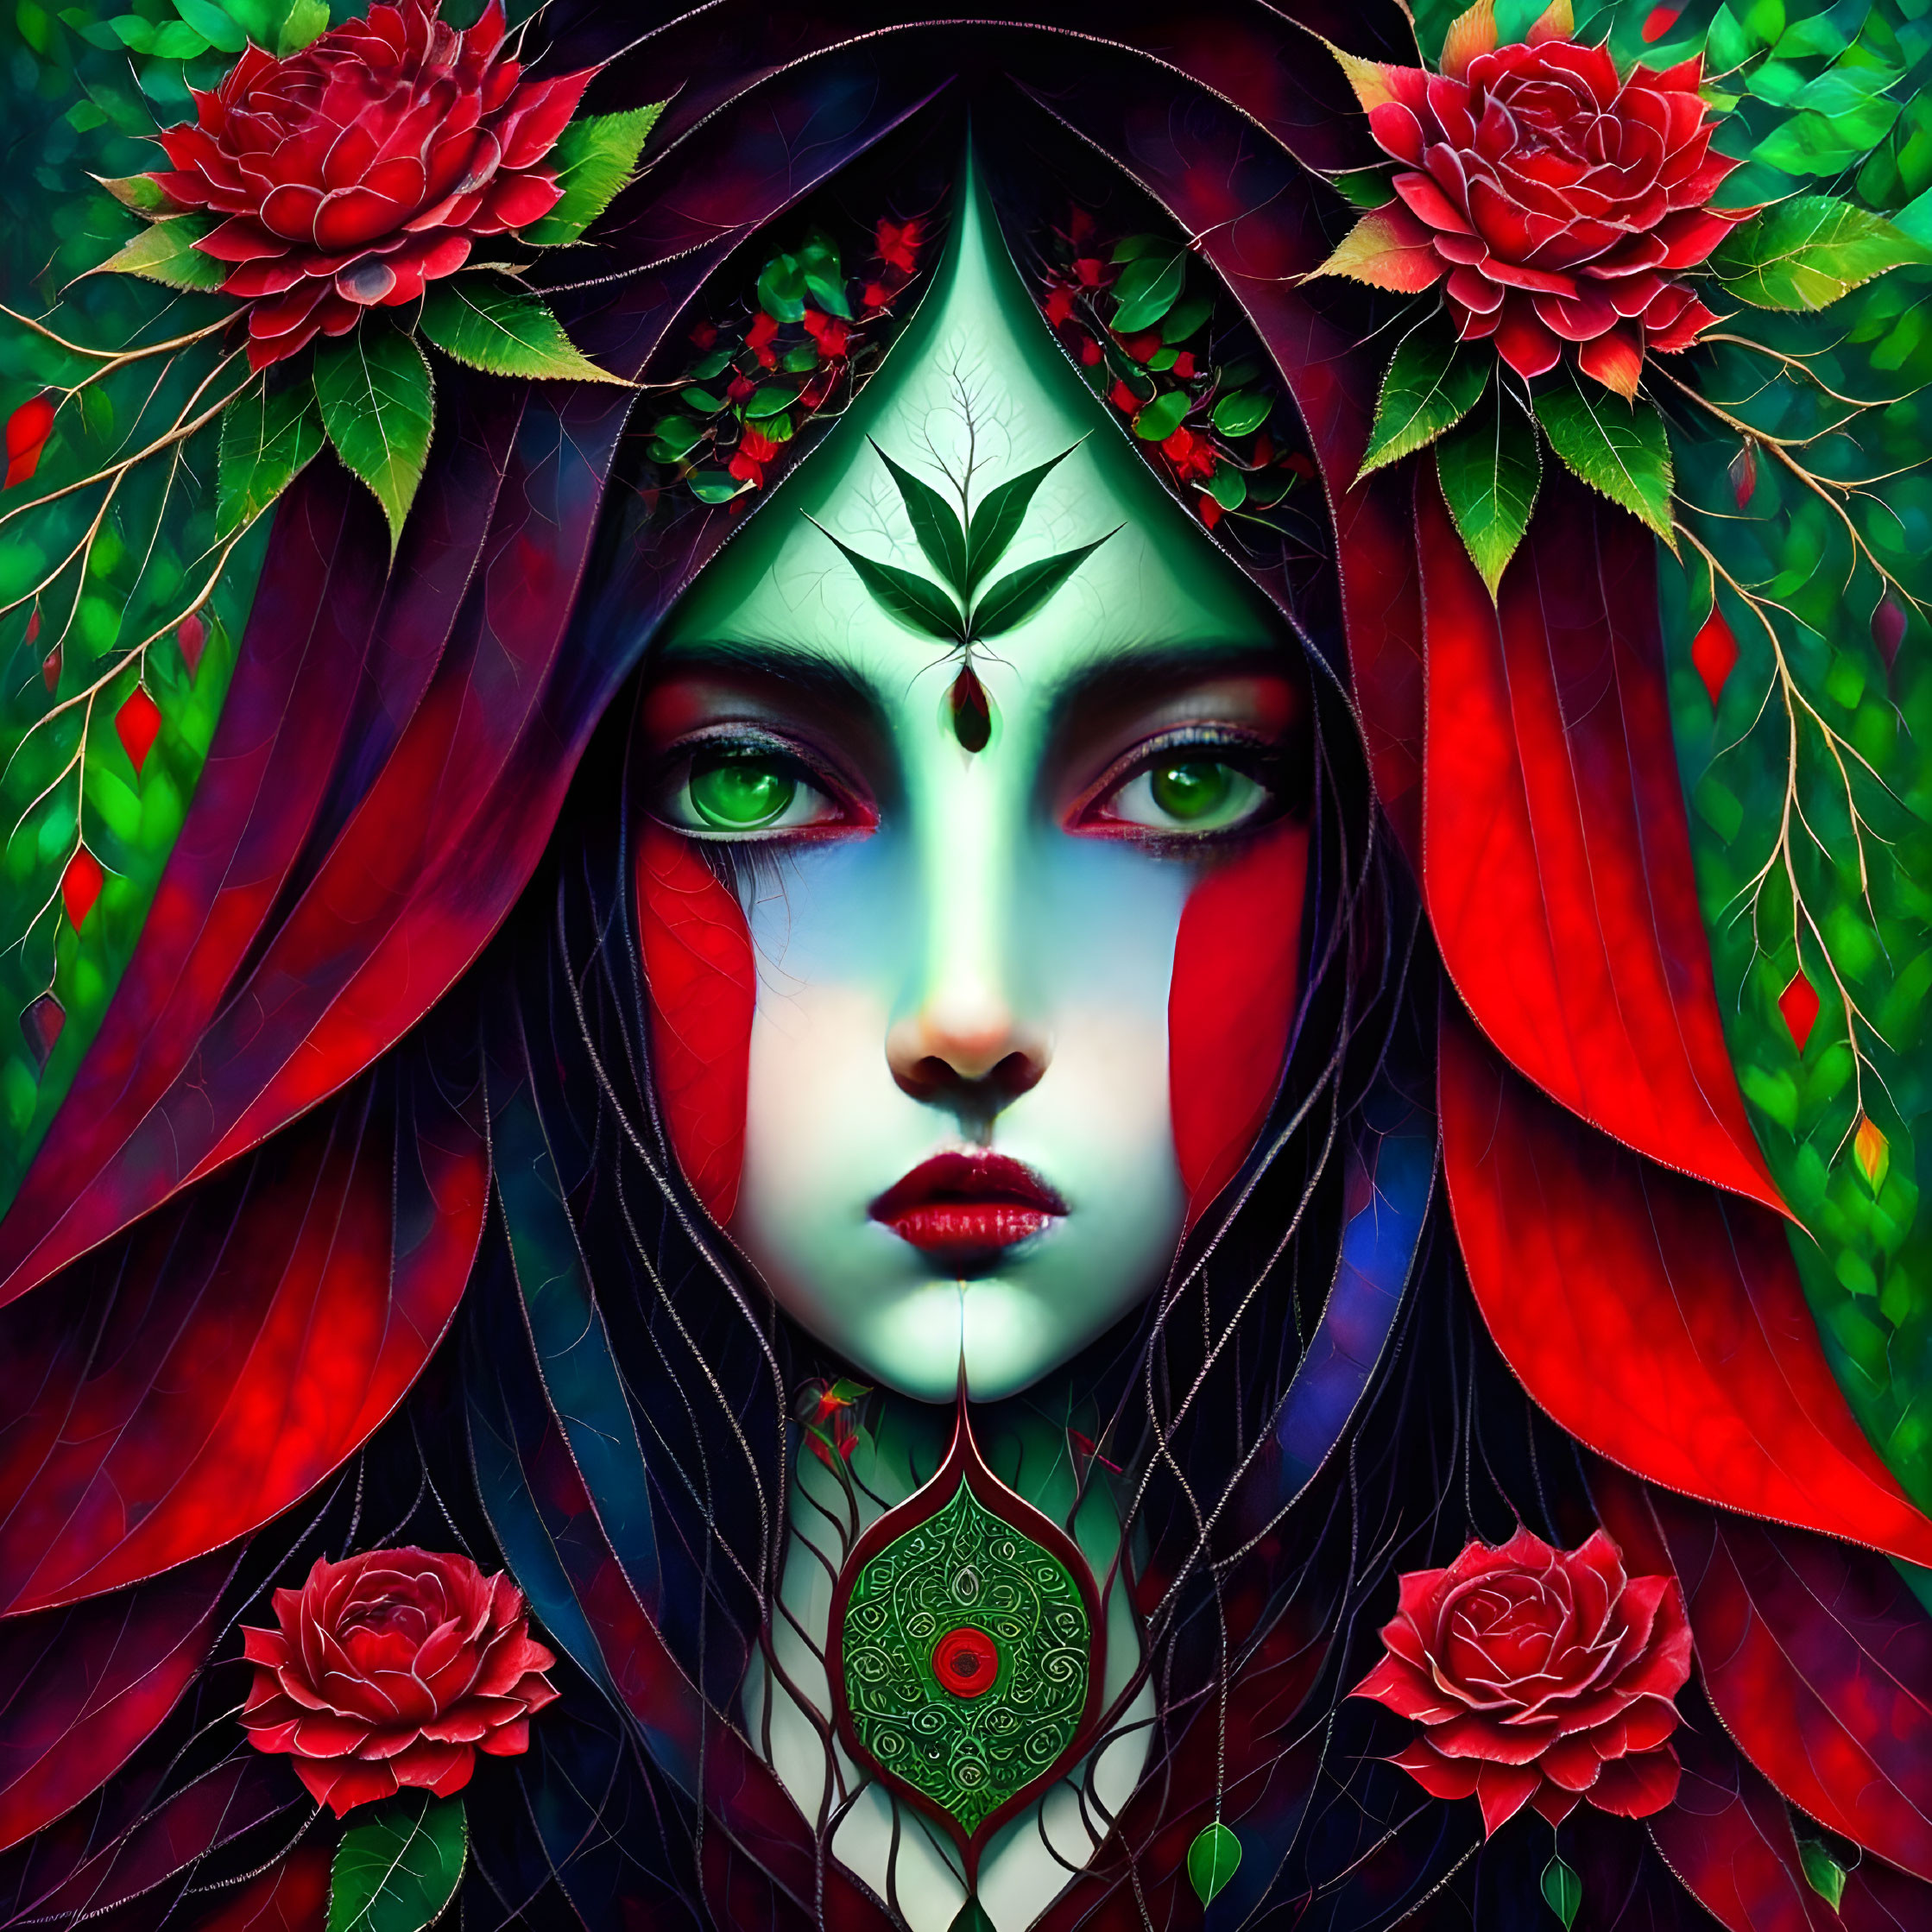 Digital artwork of woman with red hair, leaf patterns, green eyes, and roses - mystical forest theme